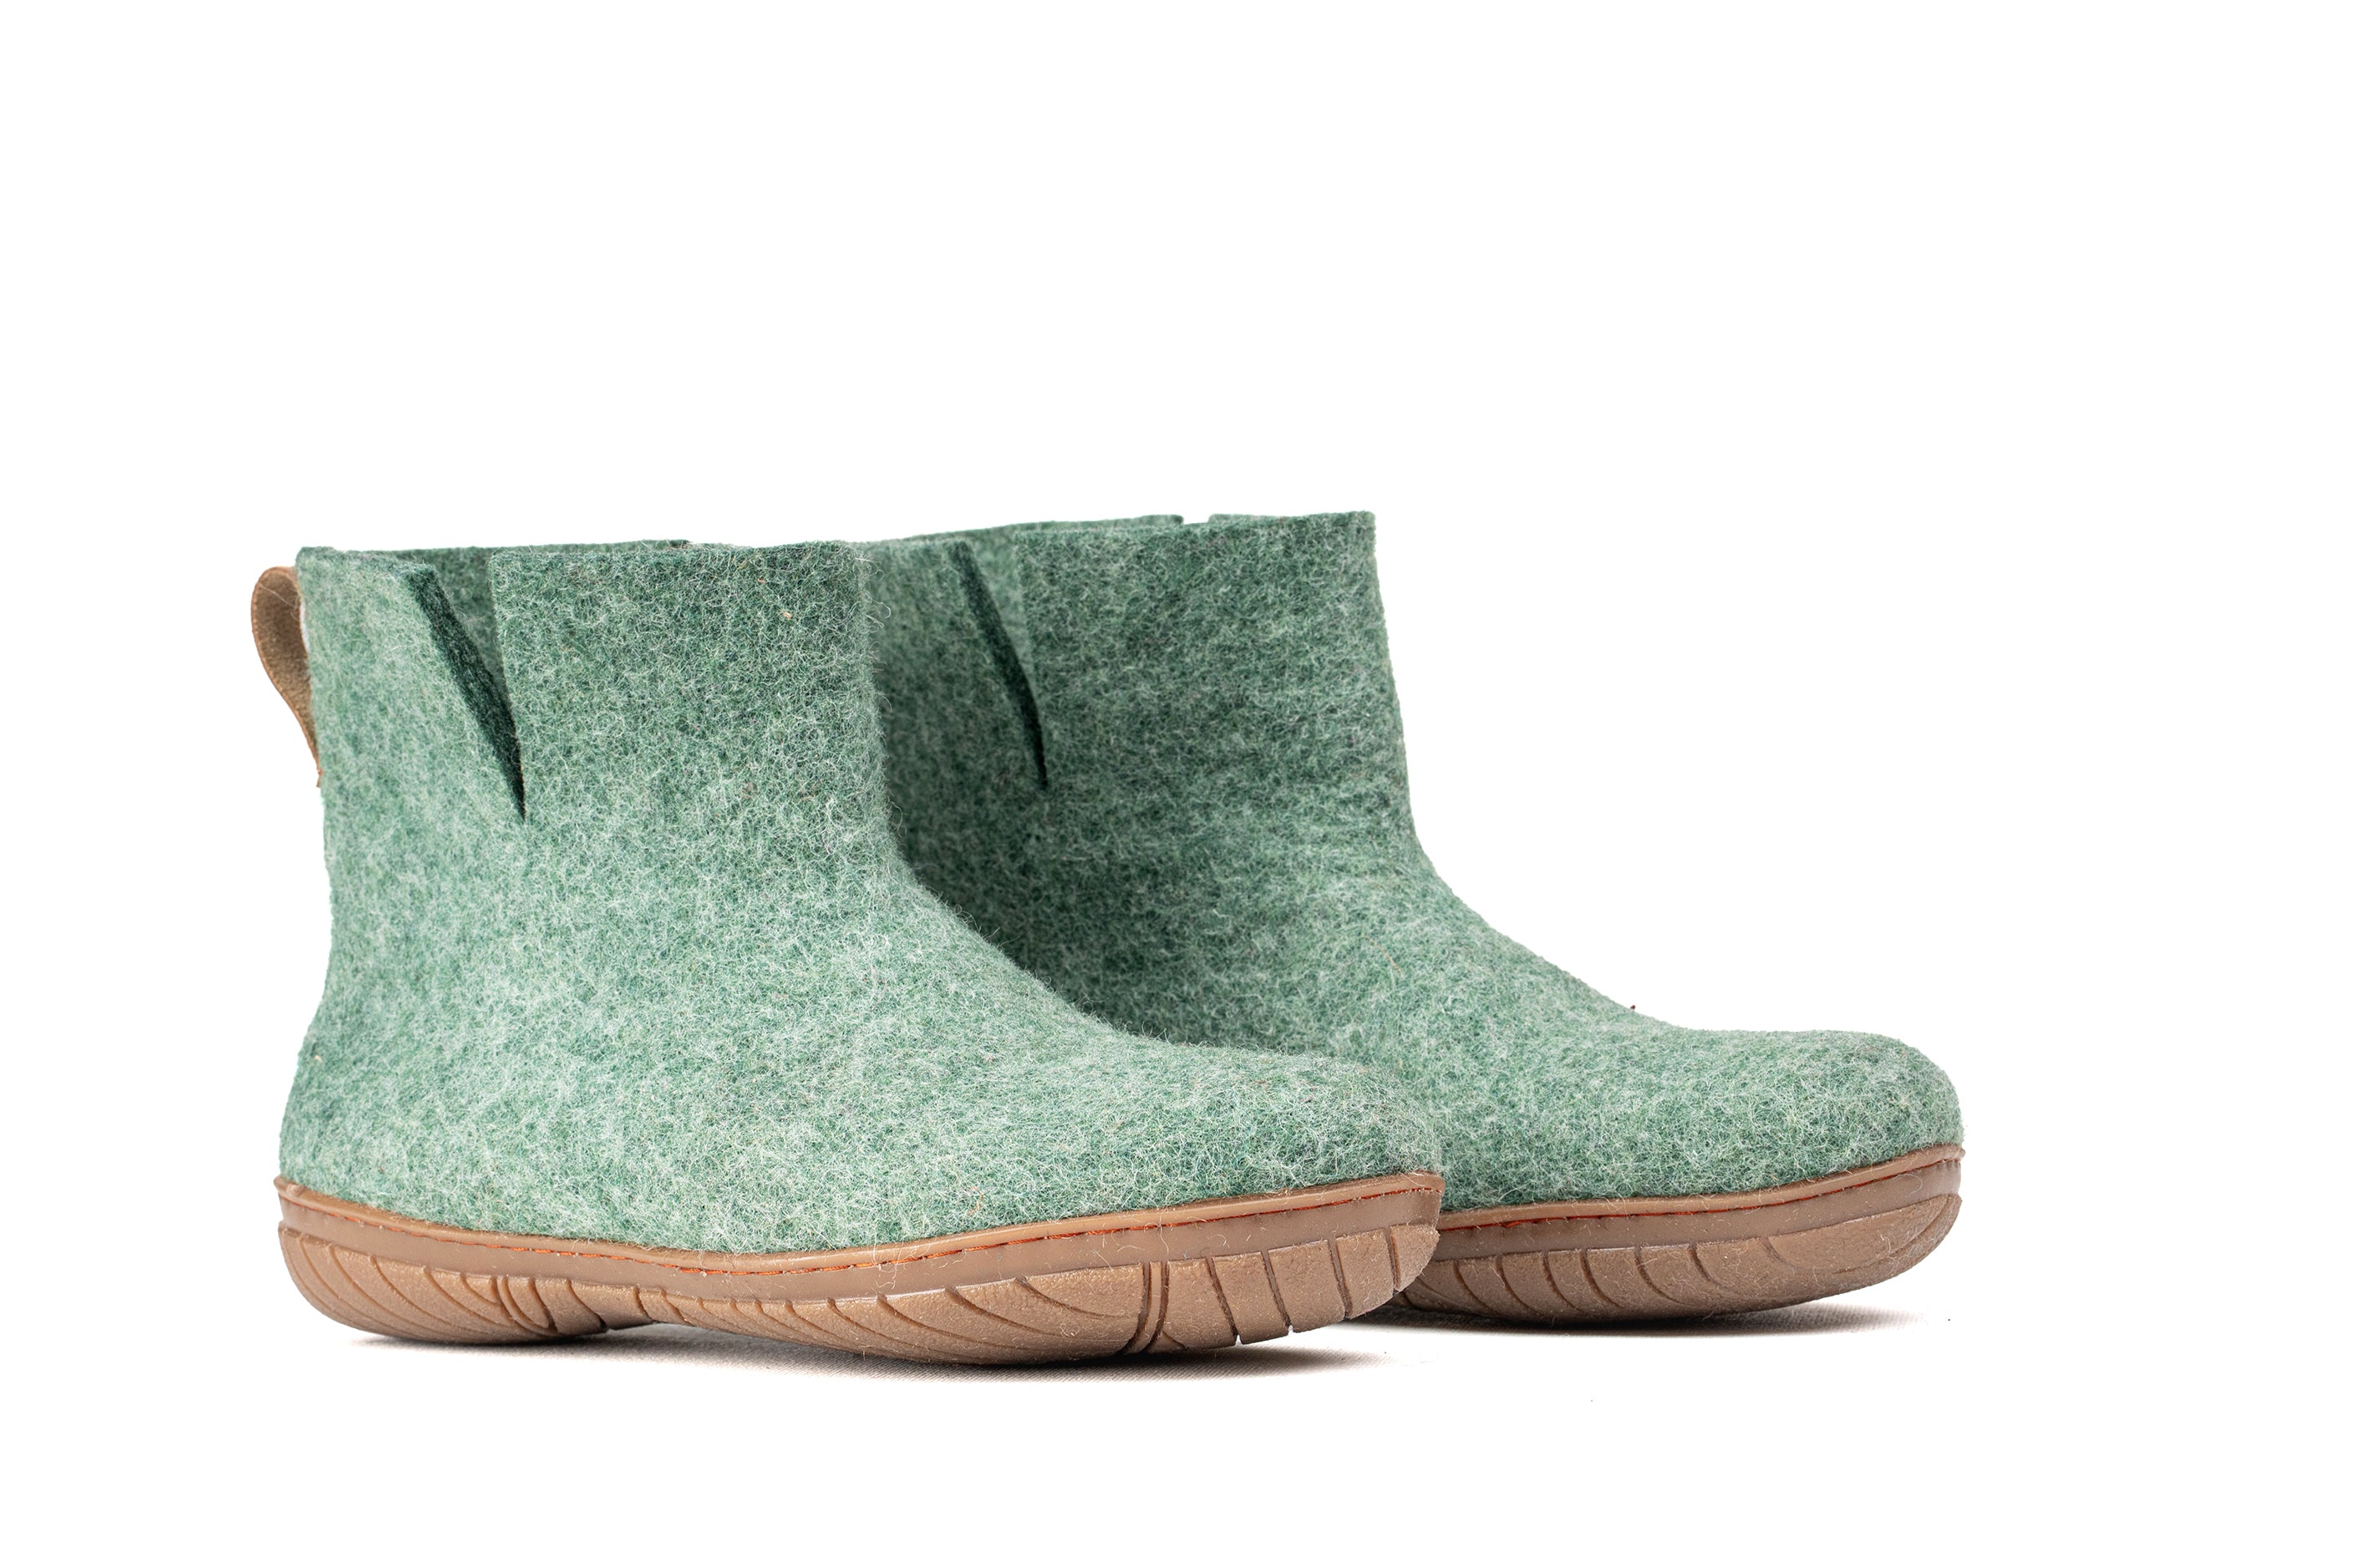 Outdoor Low Boots With Rubber Sole - Jungle Green